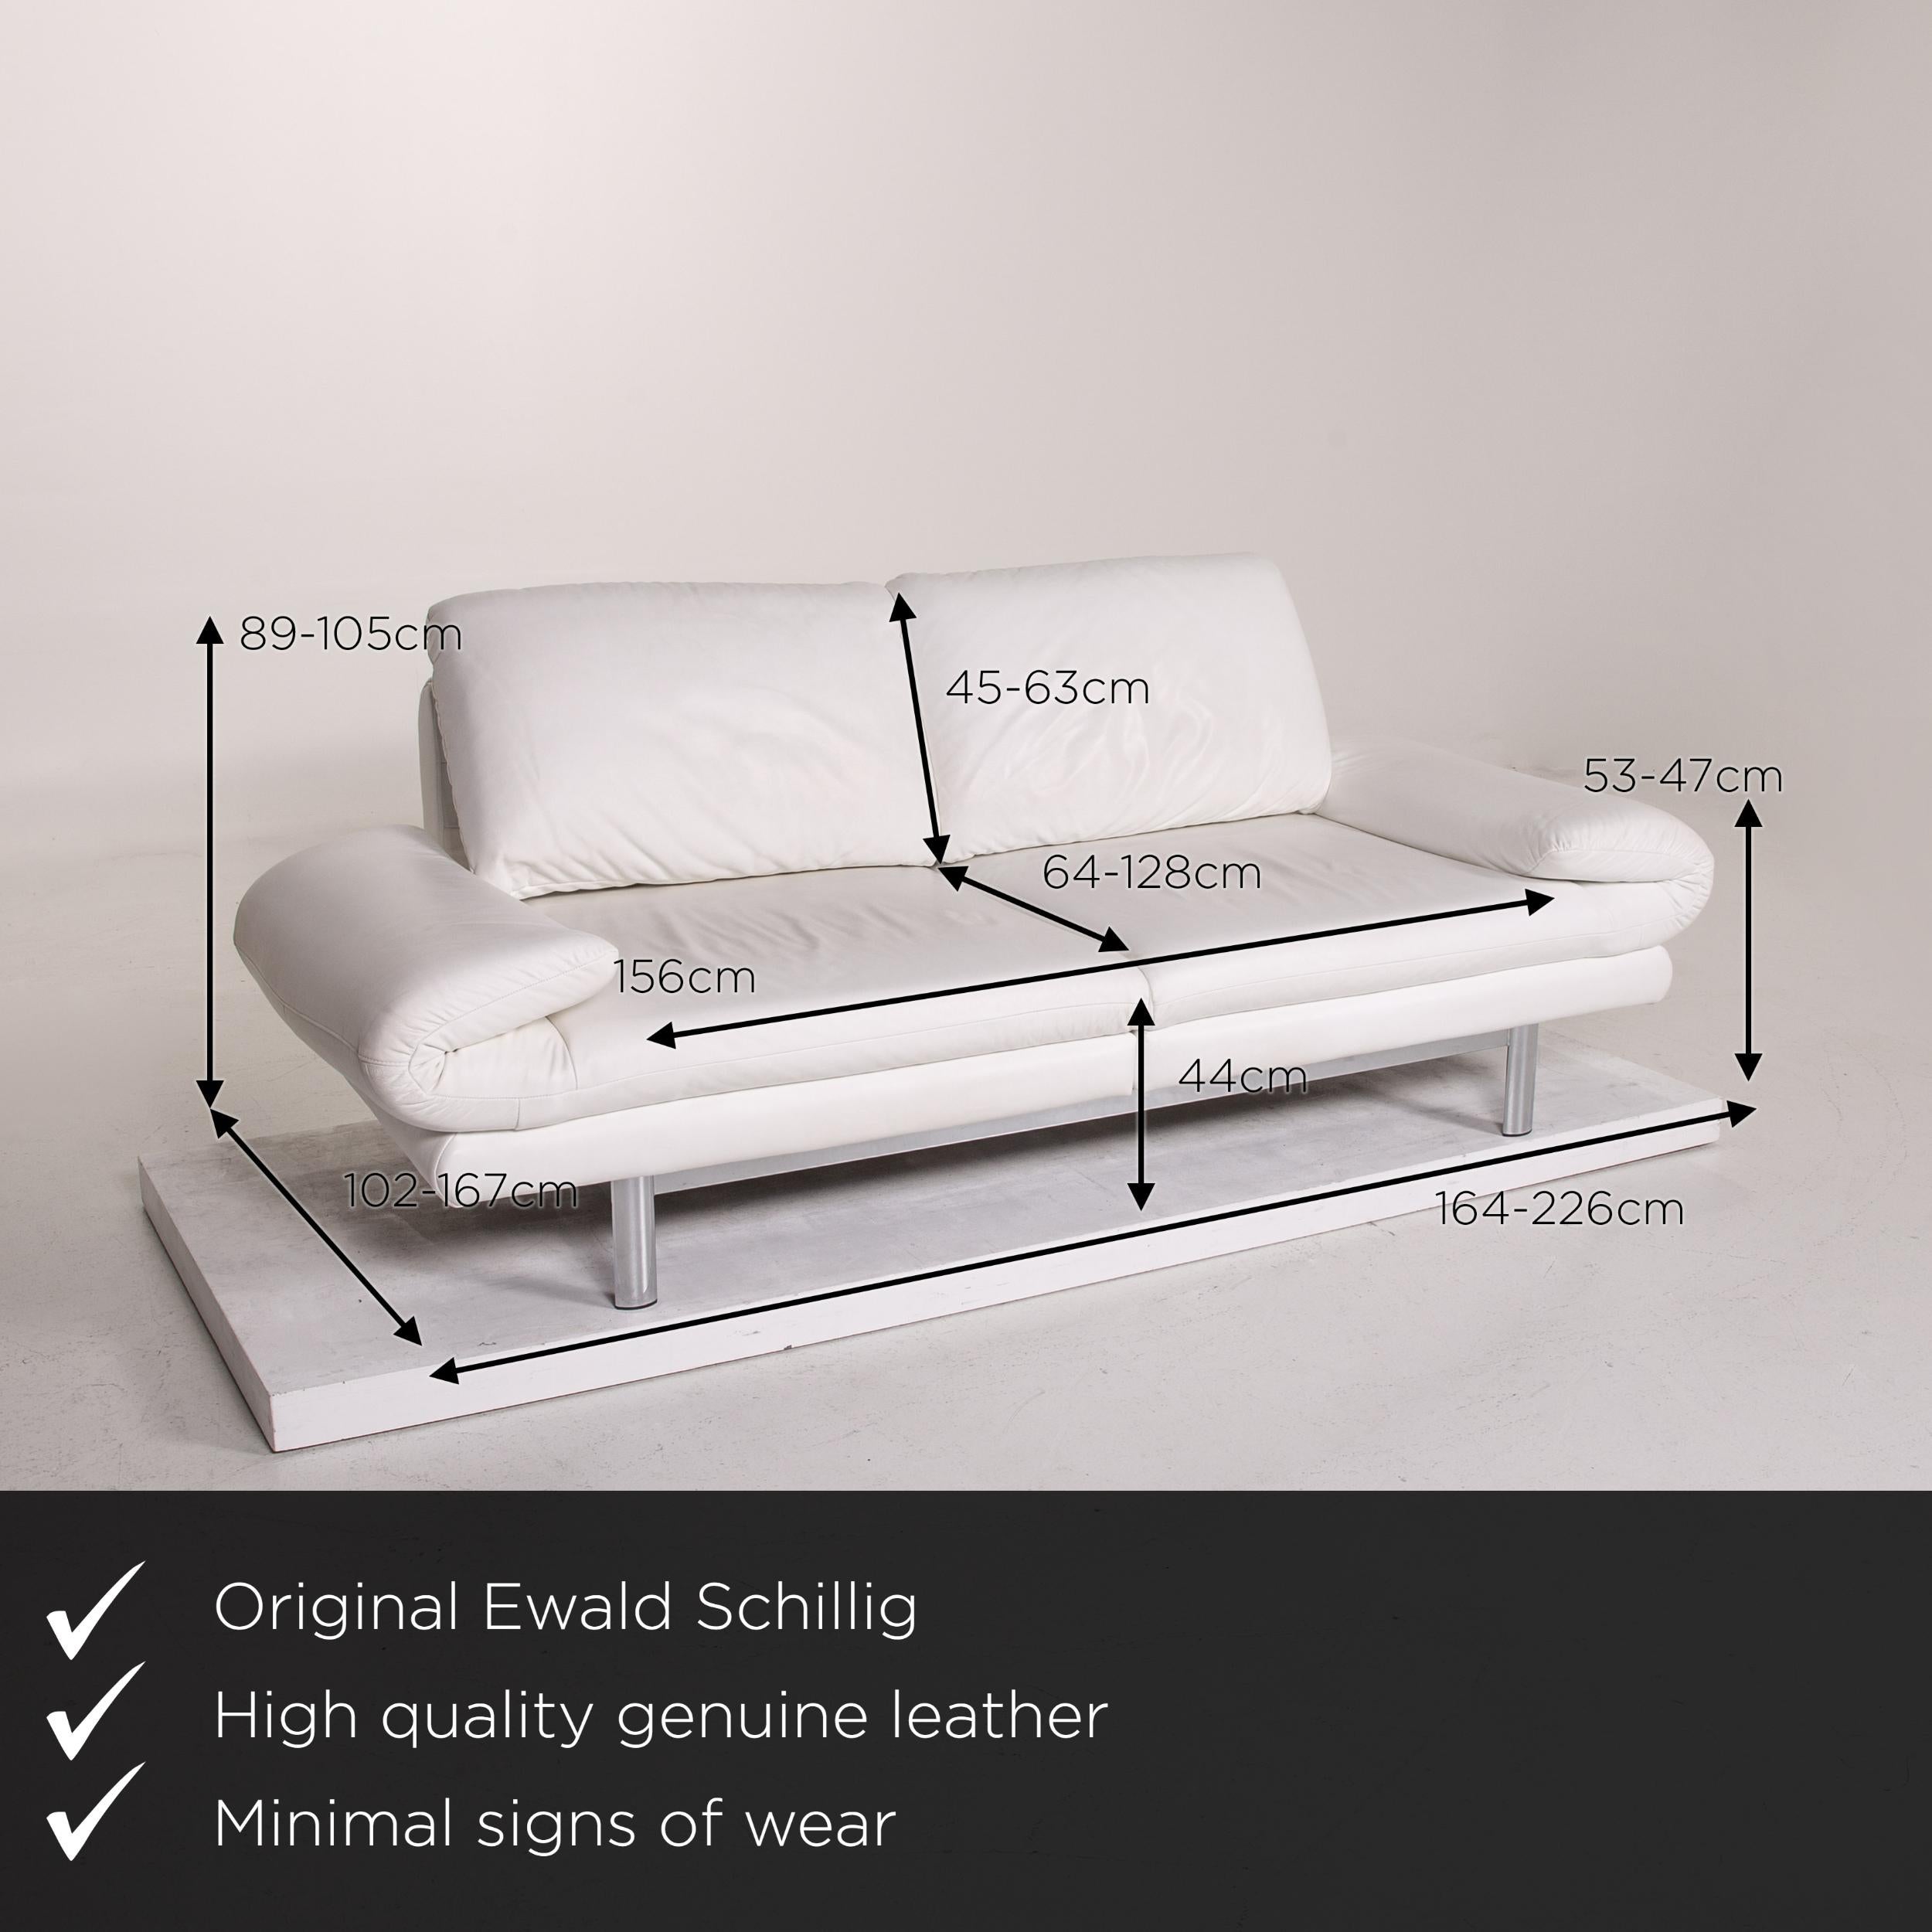 We present to you an Ewald Schillig Quinn leather sofa white second function relax position couch.
 

 Product measurements in centimeters:
 

Depth 102
Width 226
Height 89
Seat height 44
Rest height 53
Seat depth 64
Seat width 156
Back